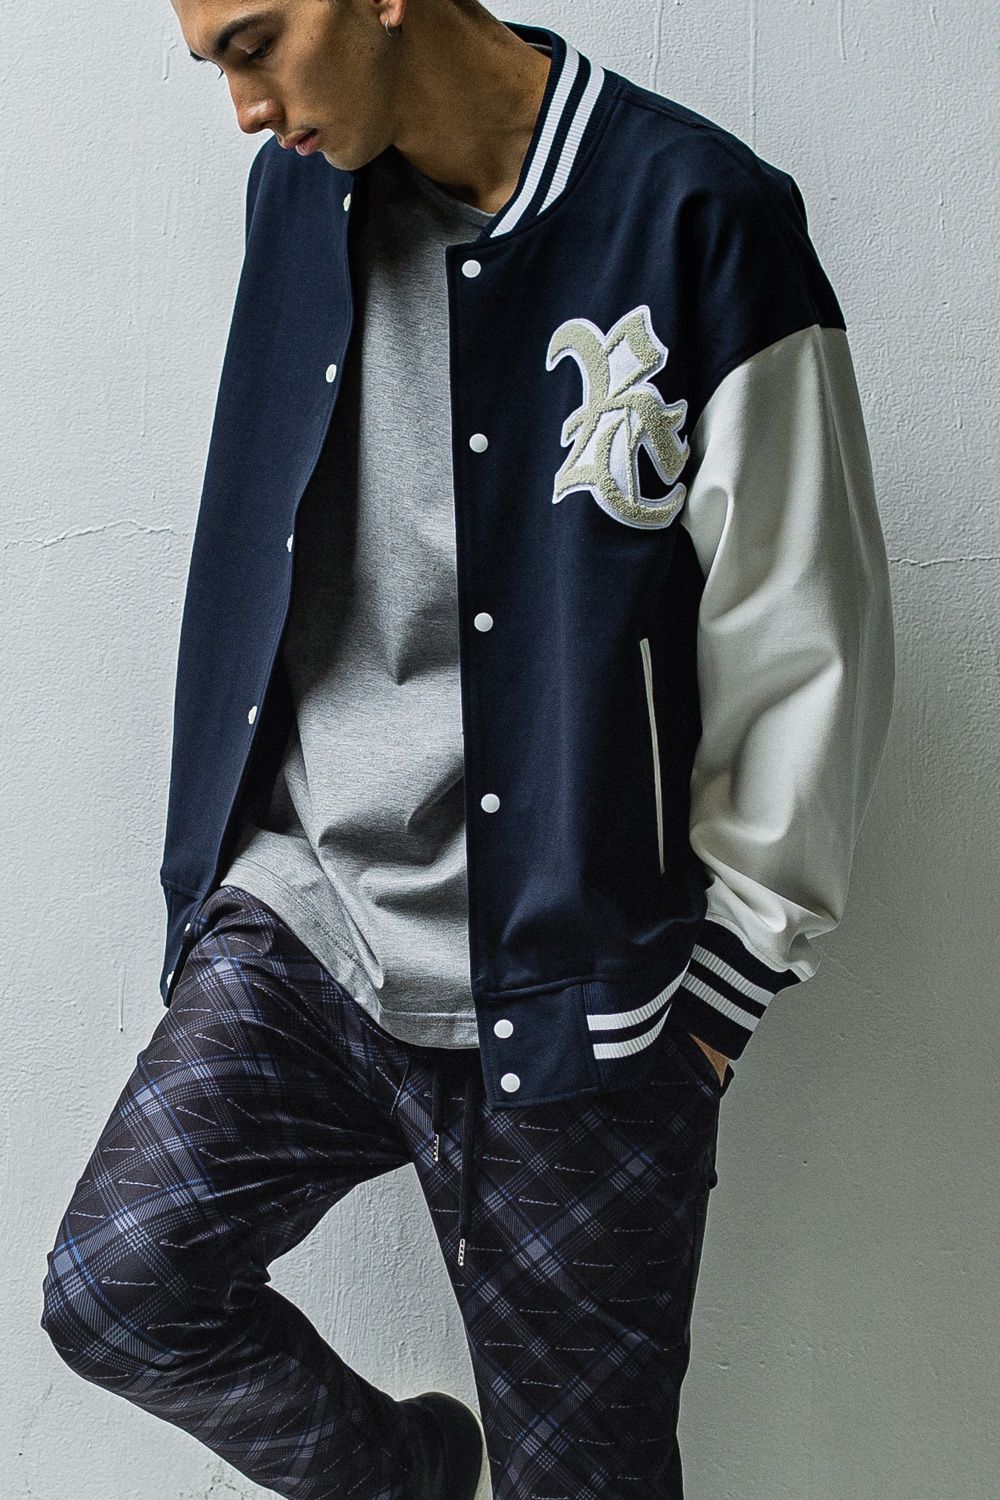 RESOUND CLOTHING - RC JERSEY OVER VARSITY JACKET / RCロゴ ジャージ